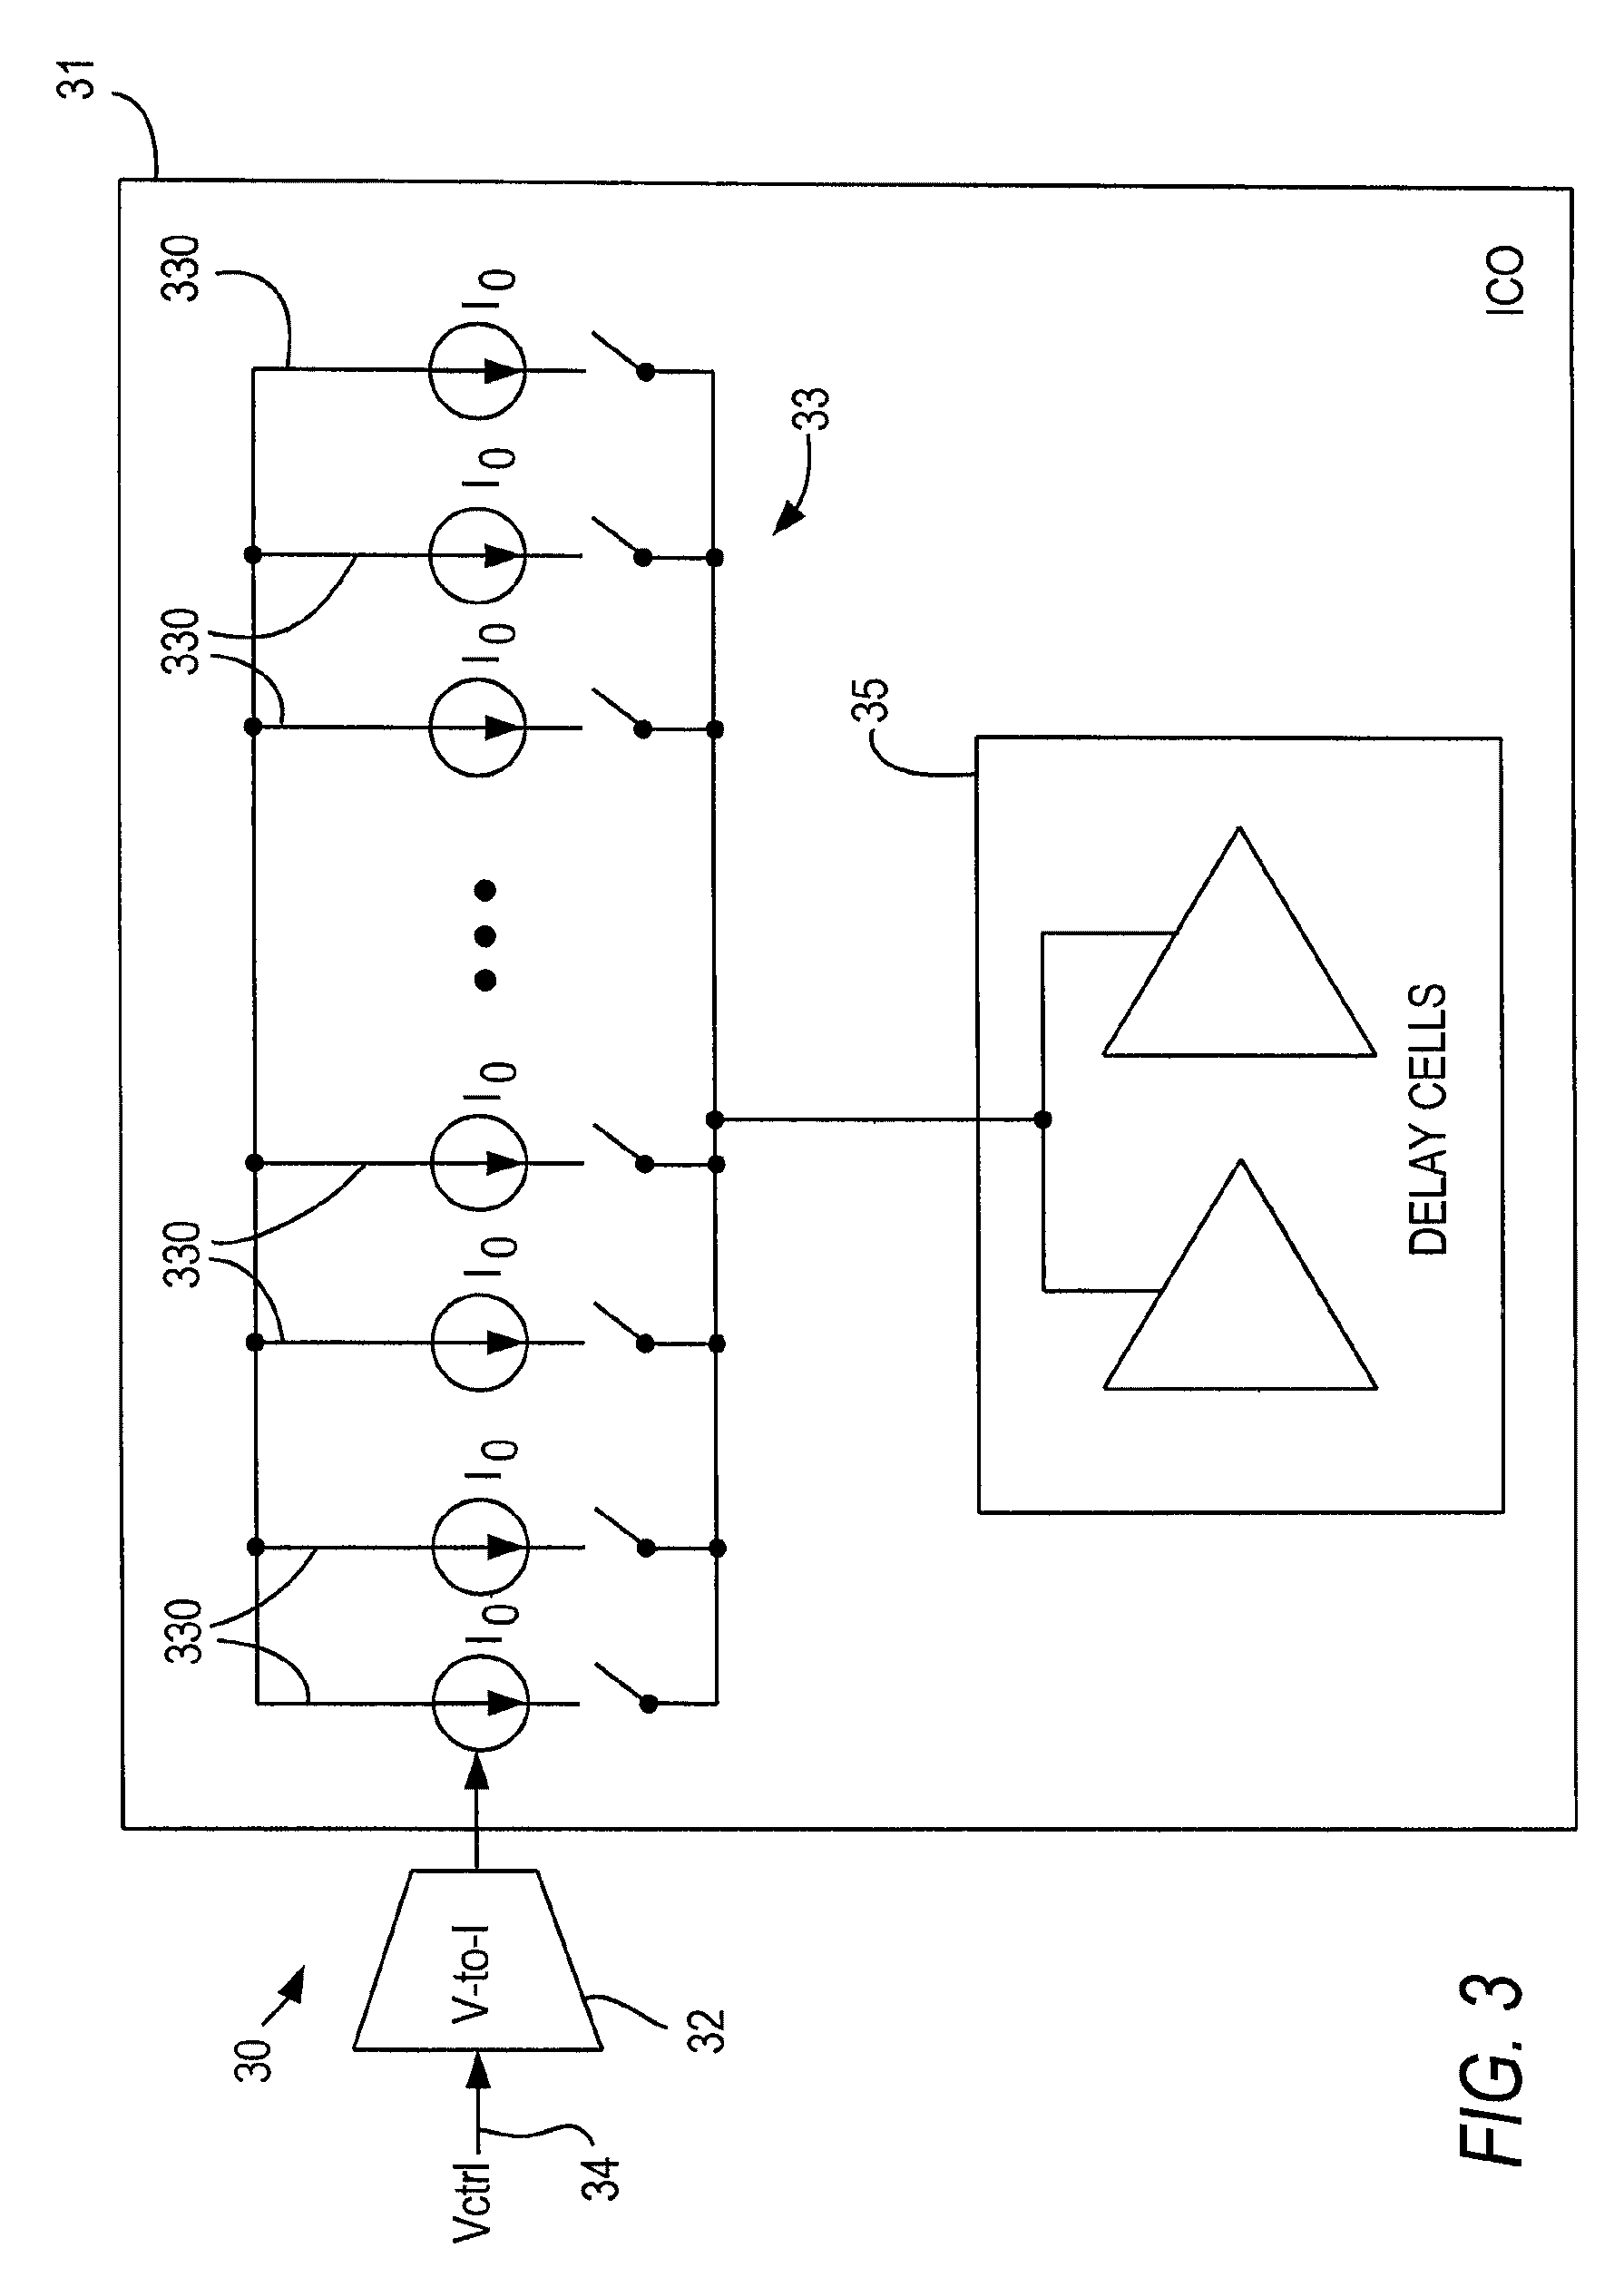 High-frequency low-gain ring VCO for clock-data recovery in high-speed serial interface of a programmable logic device